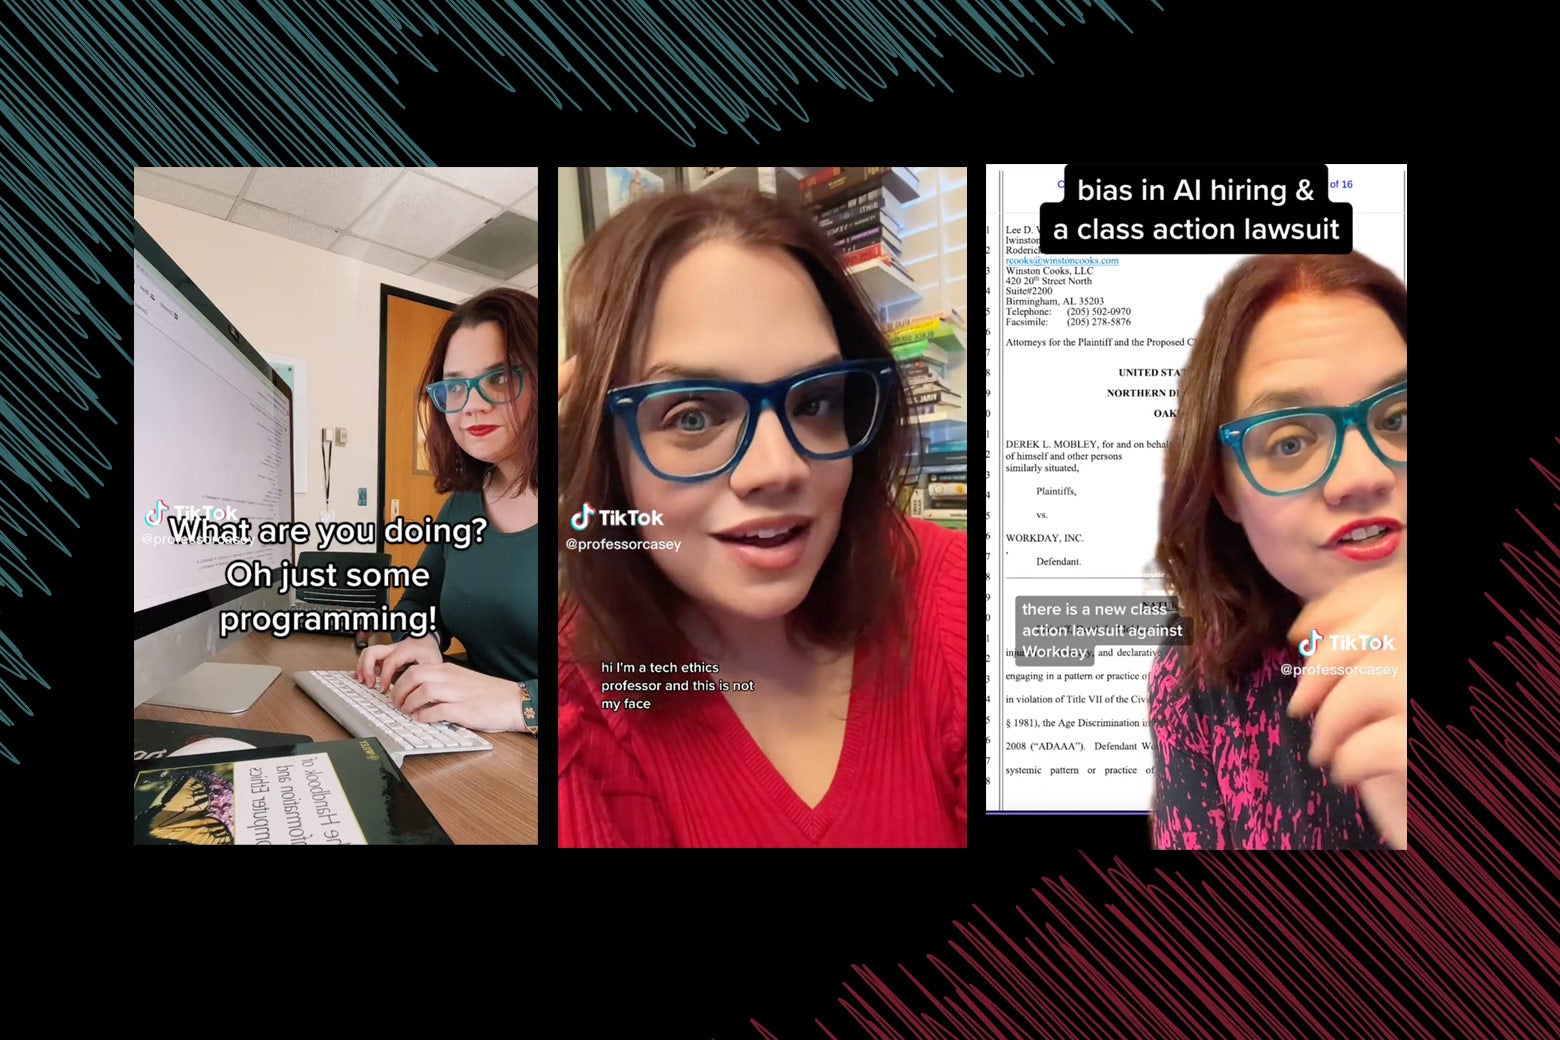 Three TikTok screengrabs, each featuring a white brunette woman with blue glasses. In the first, she is seated at a computer and the text says "What Are you doing? Oh just some computer programming!"; the second shows a filter over her face with the caption "hi I'm a tech ethics professor and this is not my face"; in the third she is standing in front of a court document and the caption says "bias in A.I. hiring and a class action lawsuit."